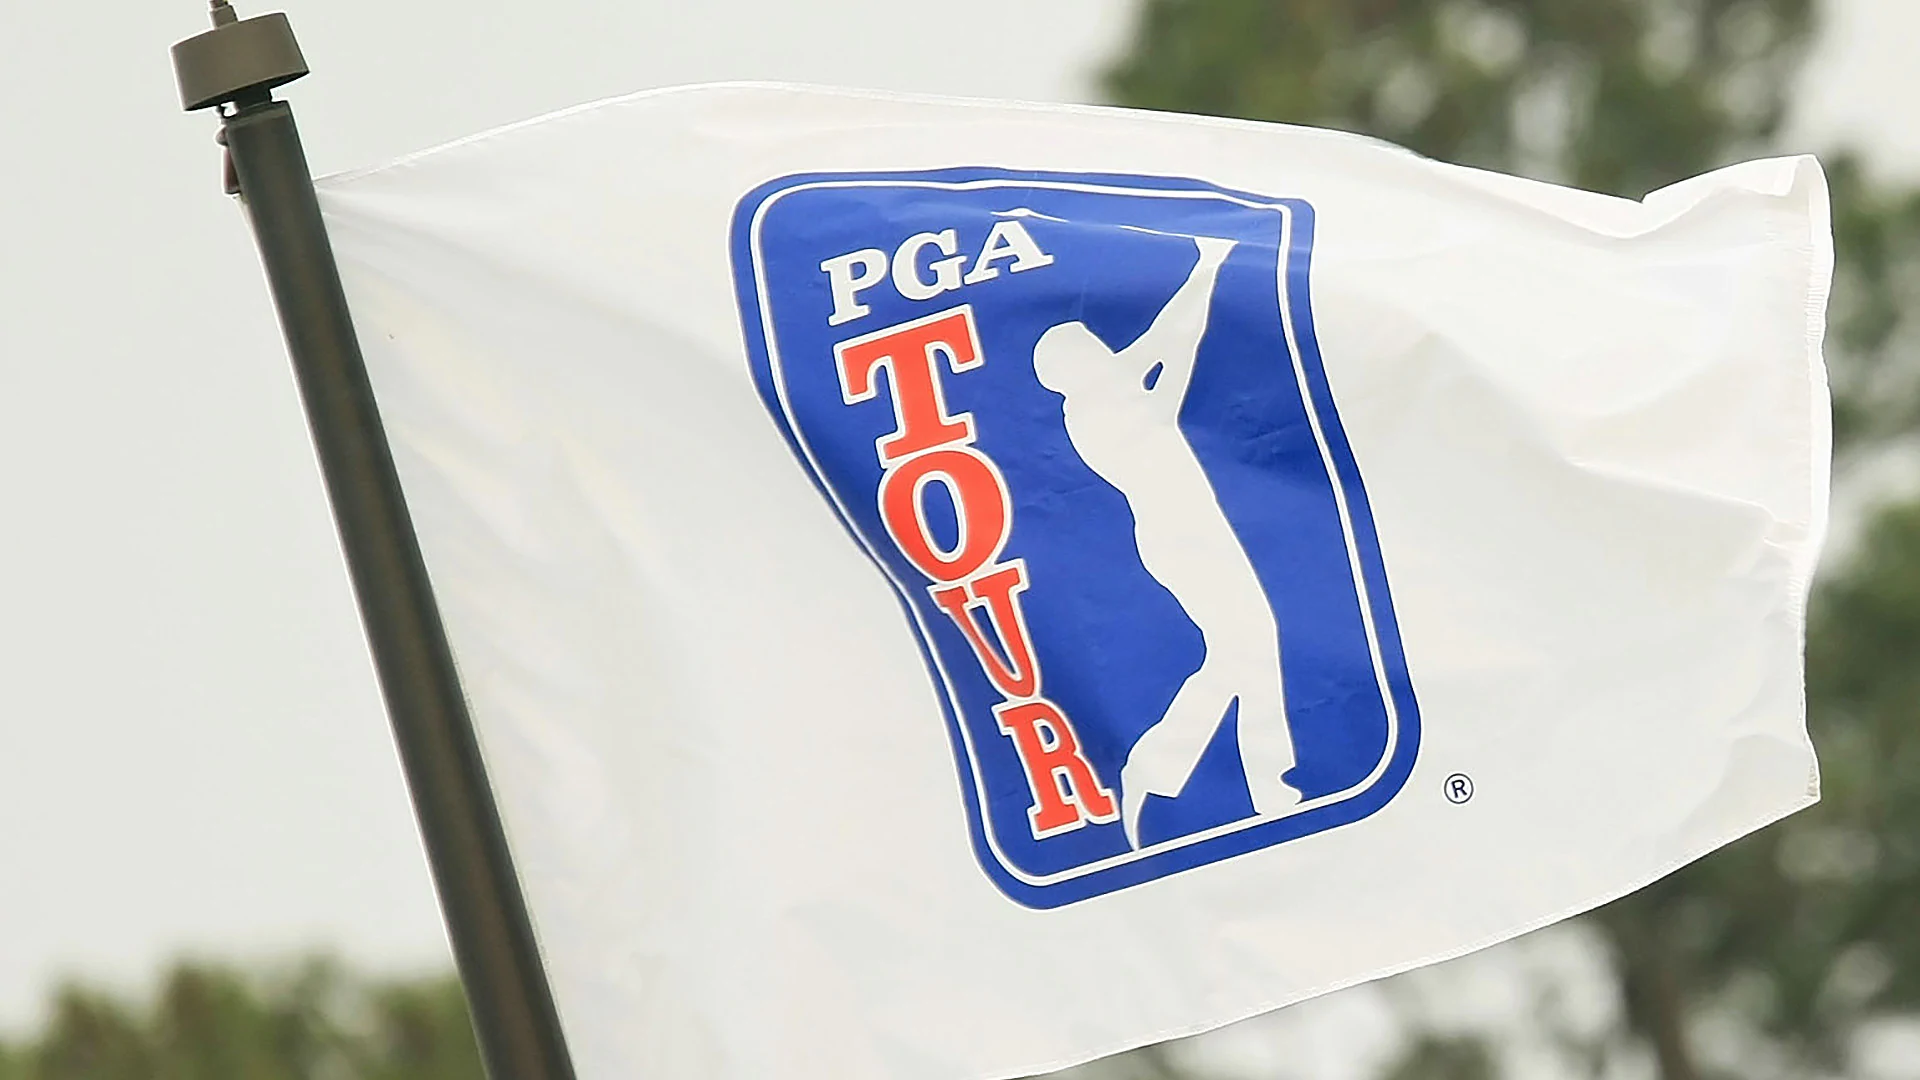 PGA Tour to release ‘Health and Safety Plan’ details next week for Colonial restart